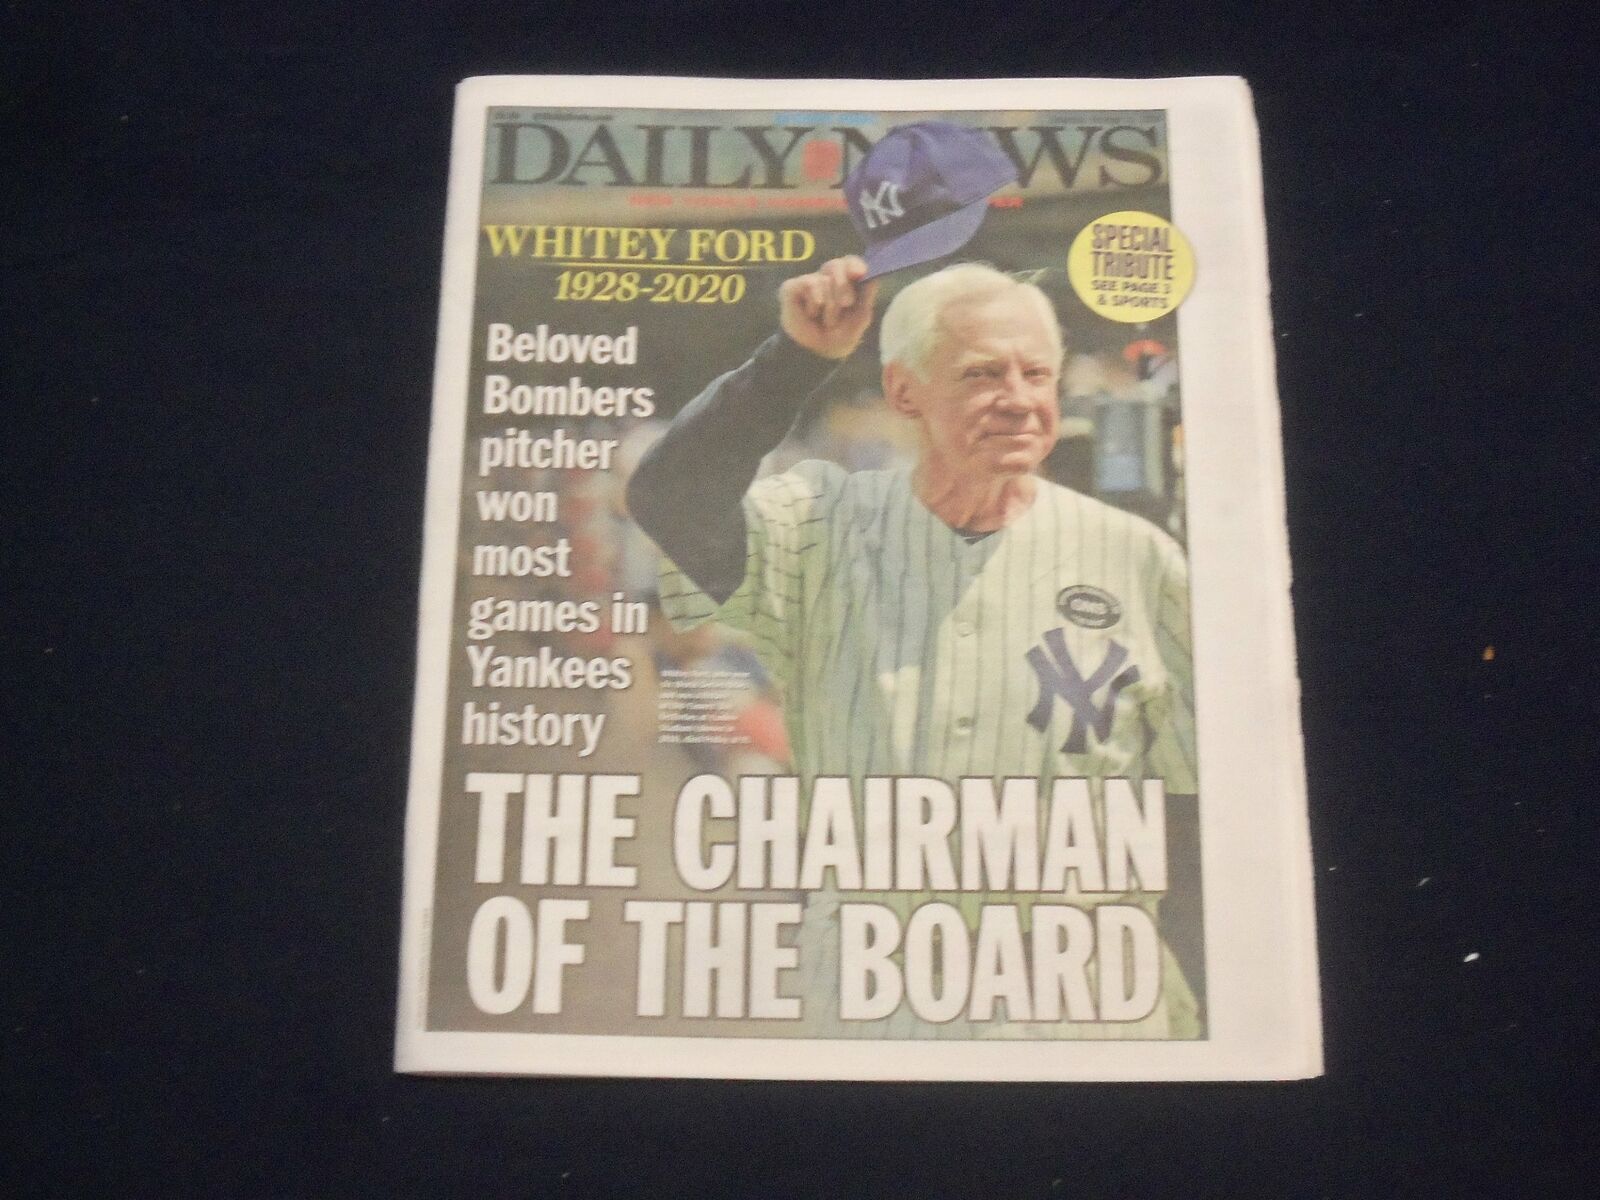 2020 OCTOBER 10 NEW YORK DAILY NEWS NEWSPAPER - WHITEY FORD DIED 1928-2020